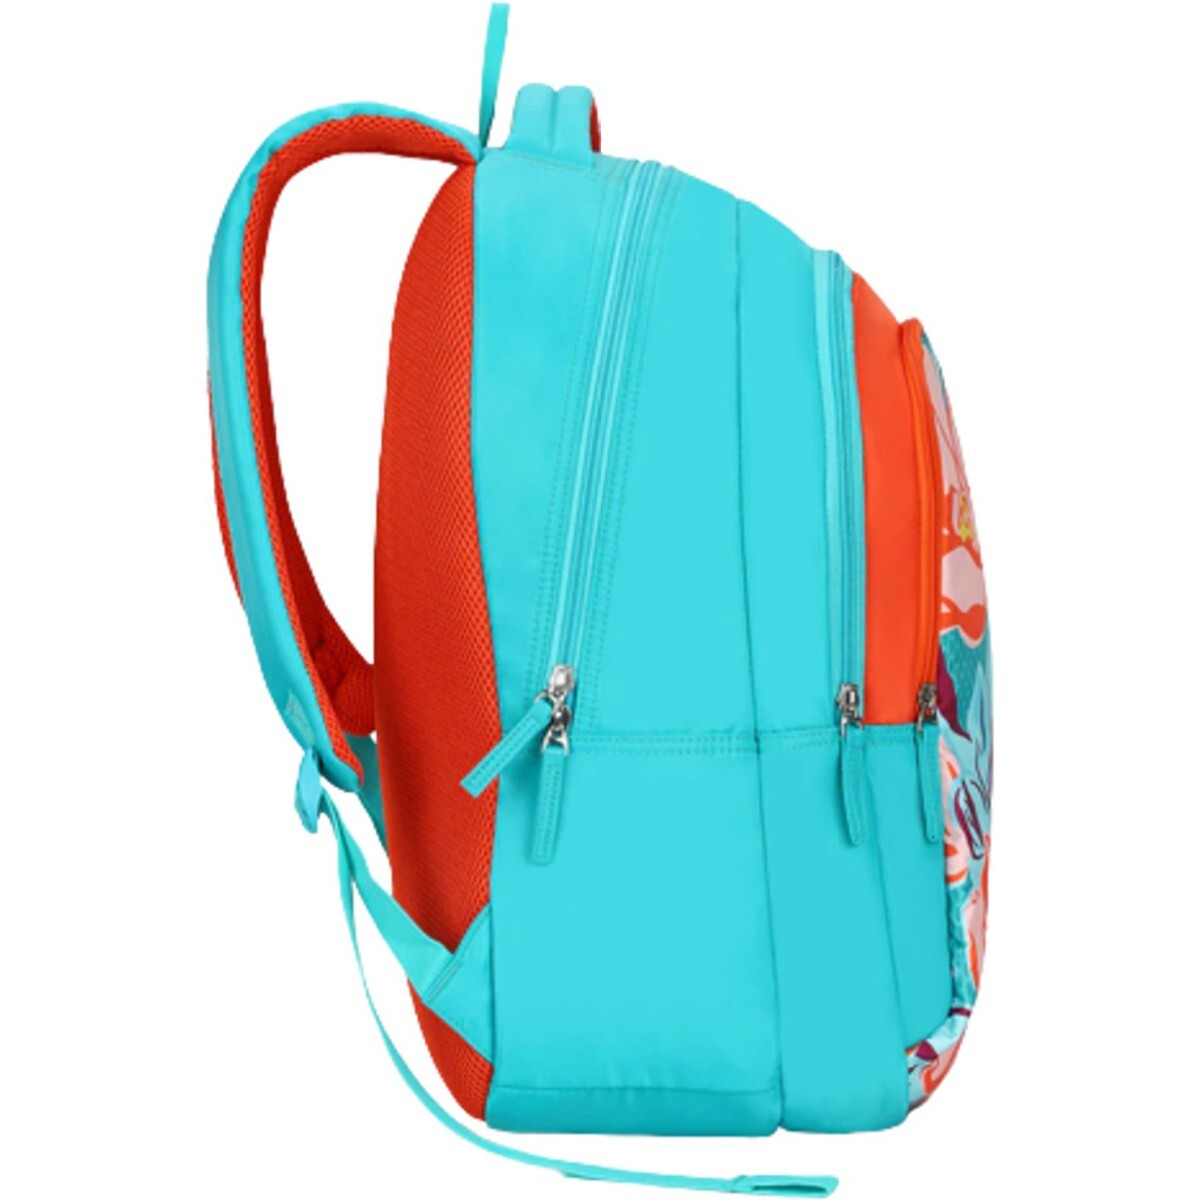 Genie Backpacks Willow 19inch Teal